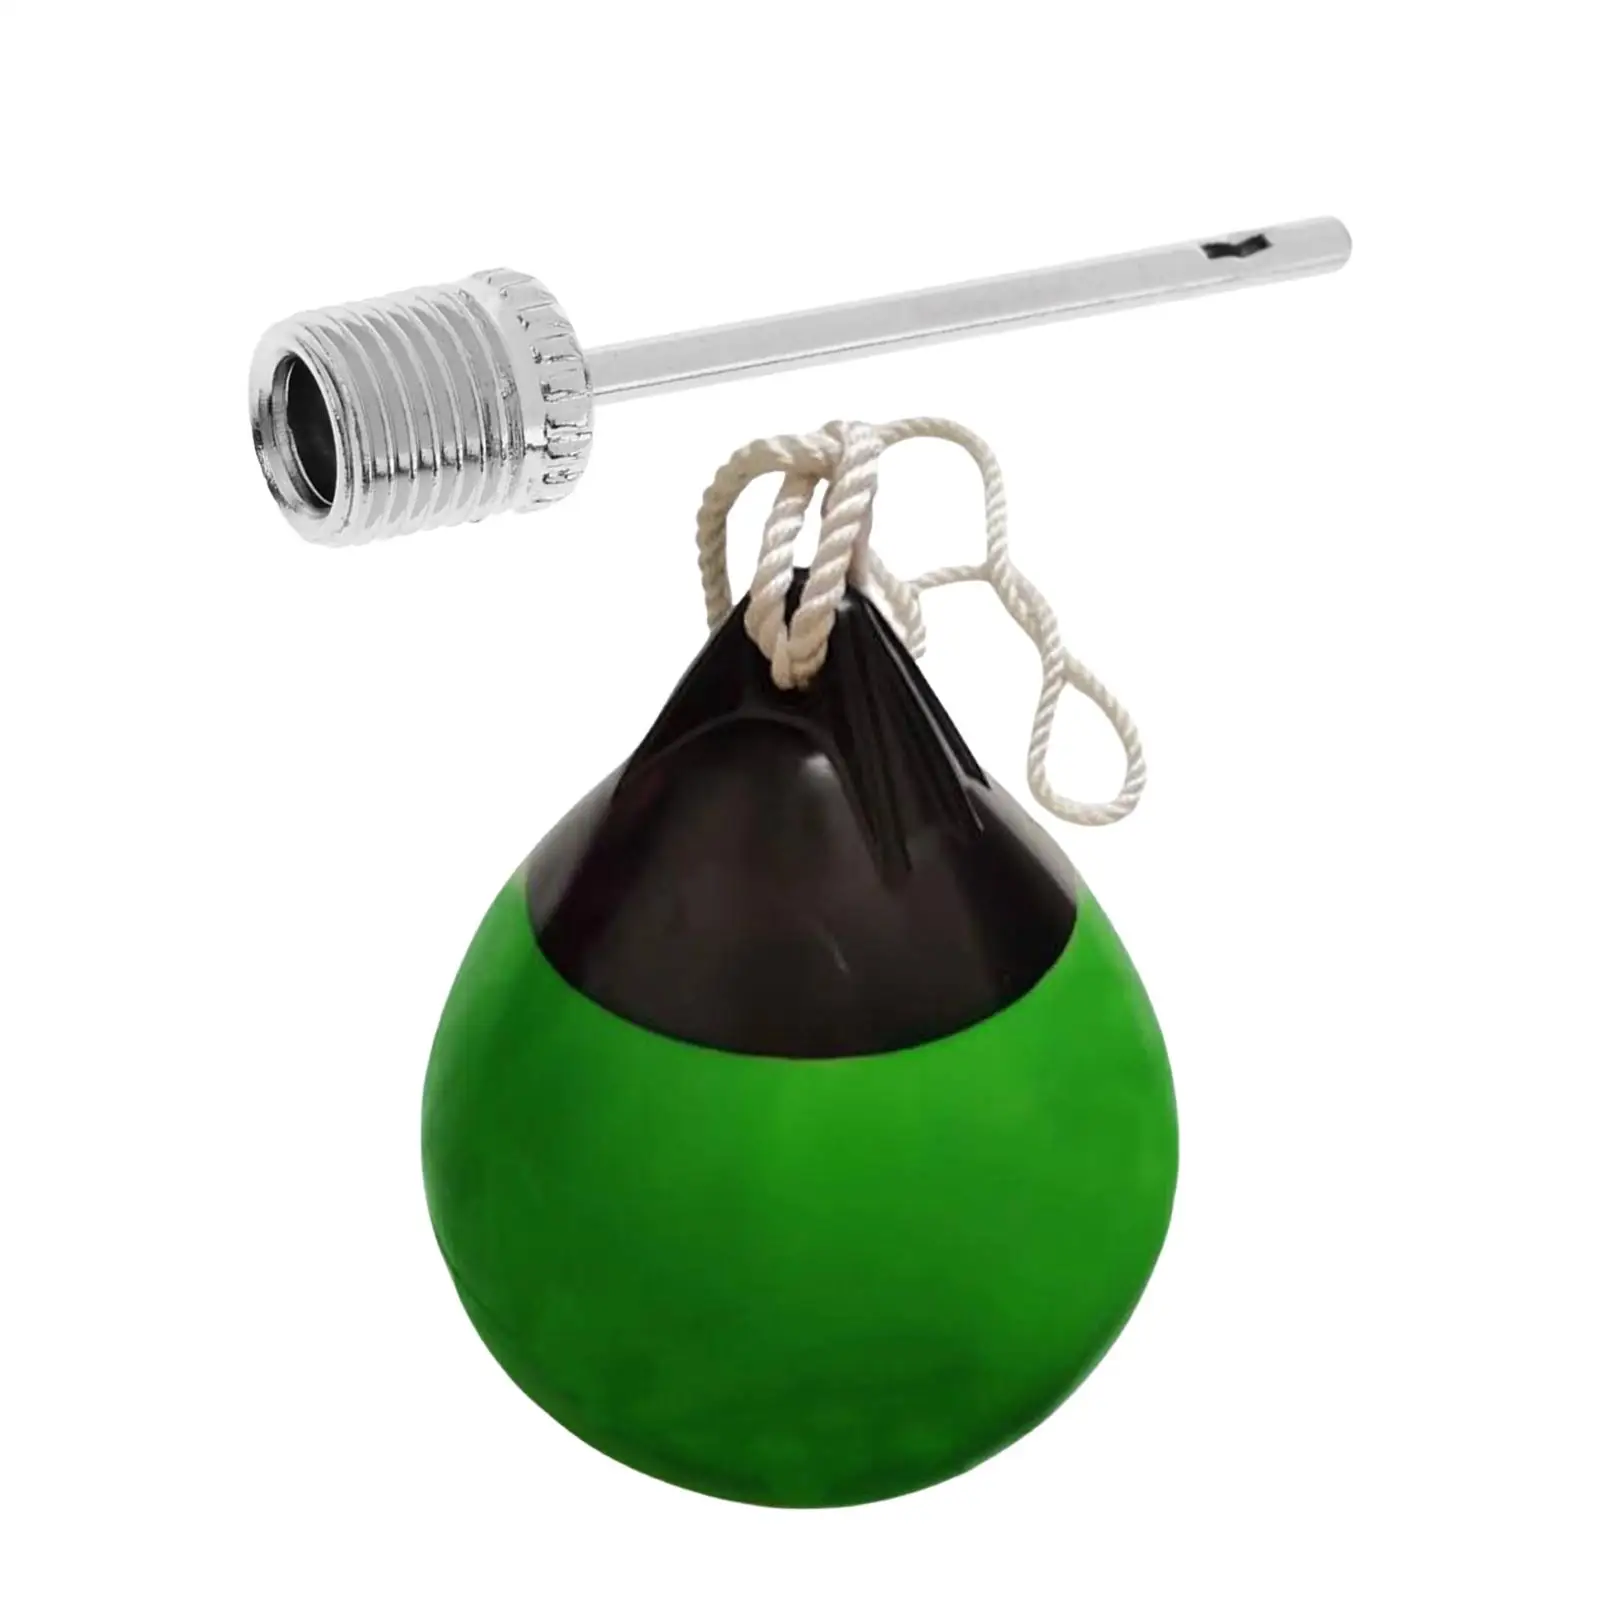 

Boat Bumpers Ball Round Anchor Buoy for Docking Fishing Marker Buoys